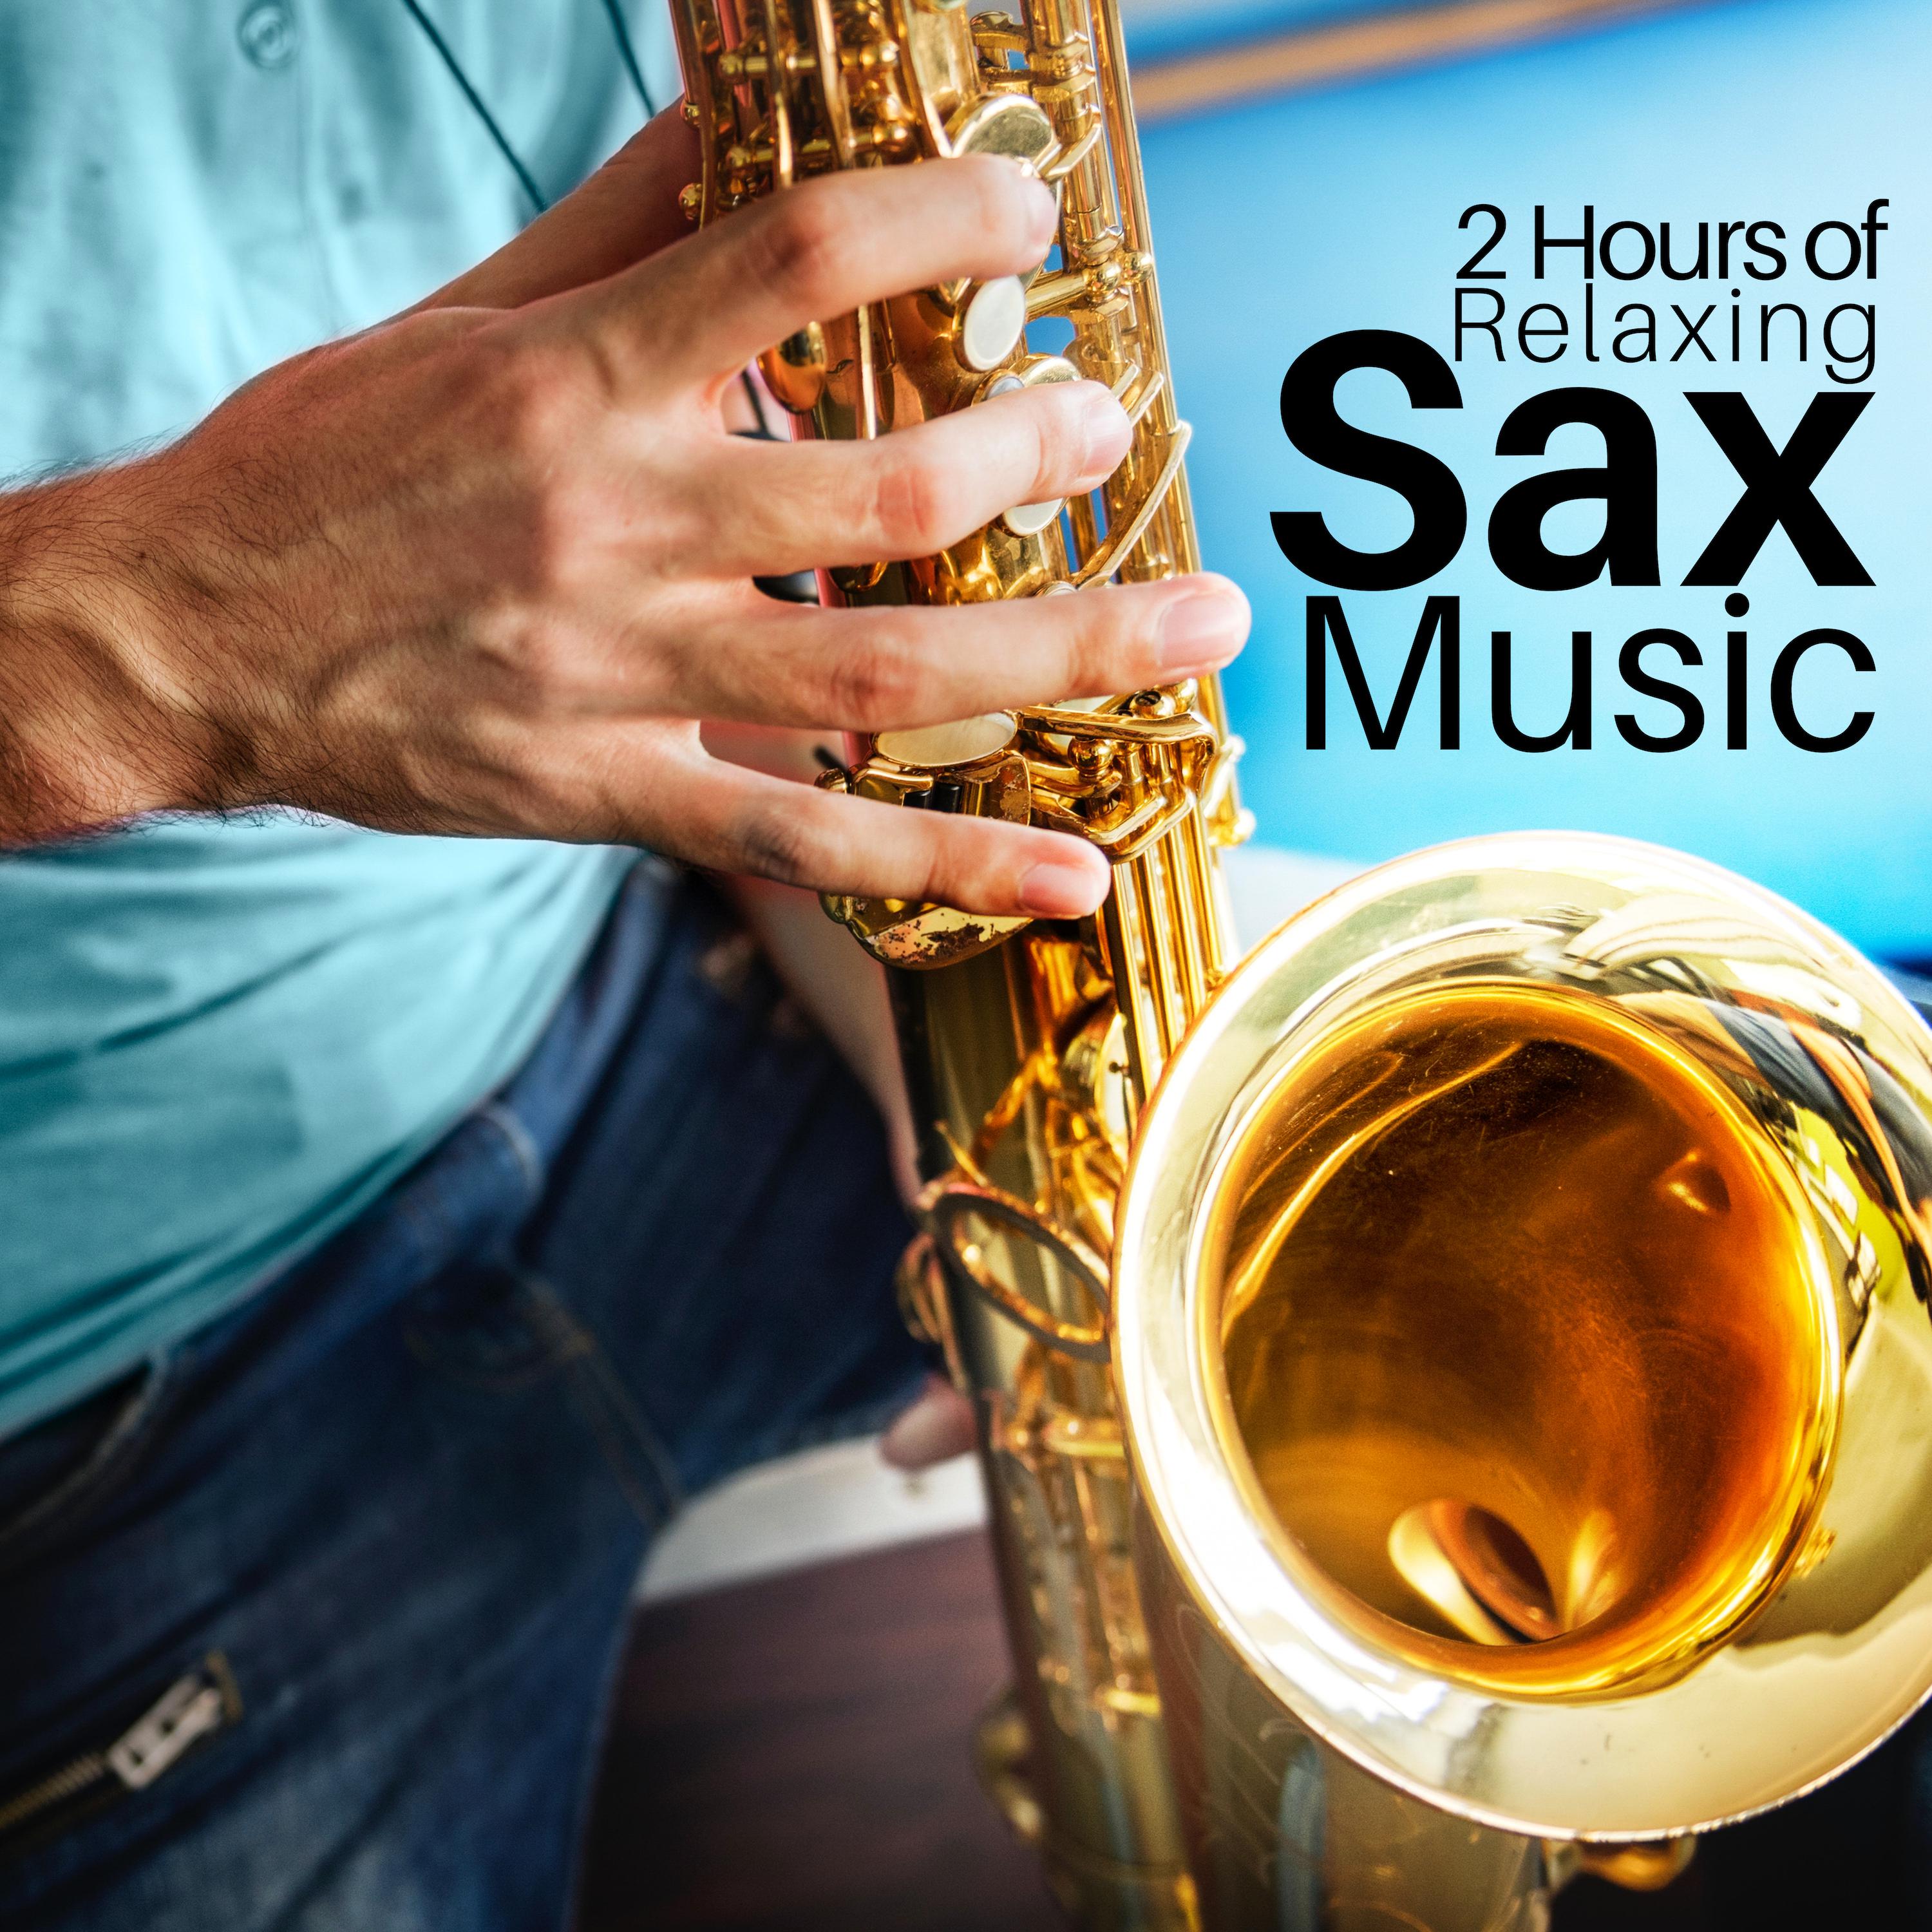 2 Hours of Relaxing Sax Music - Lounge Club Essential